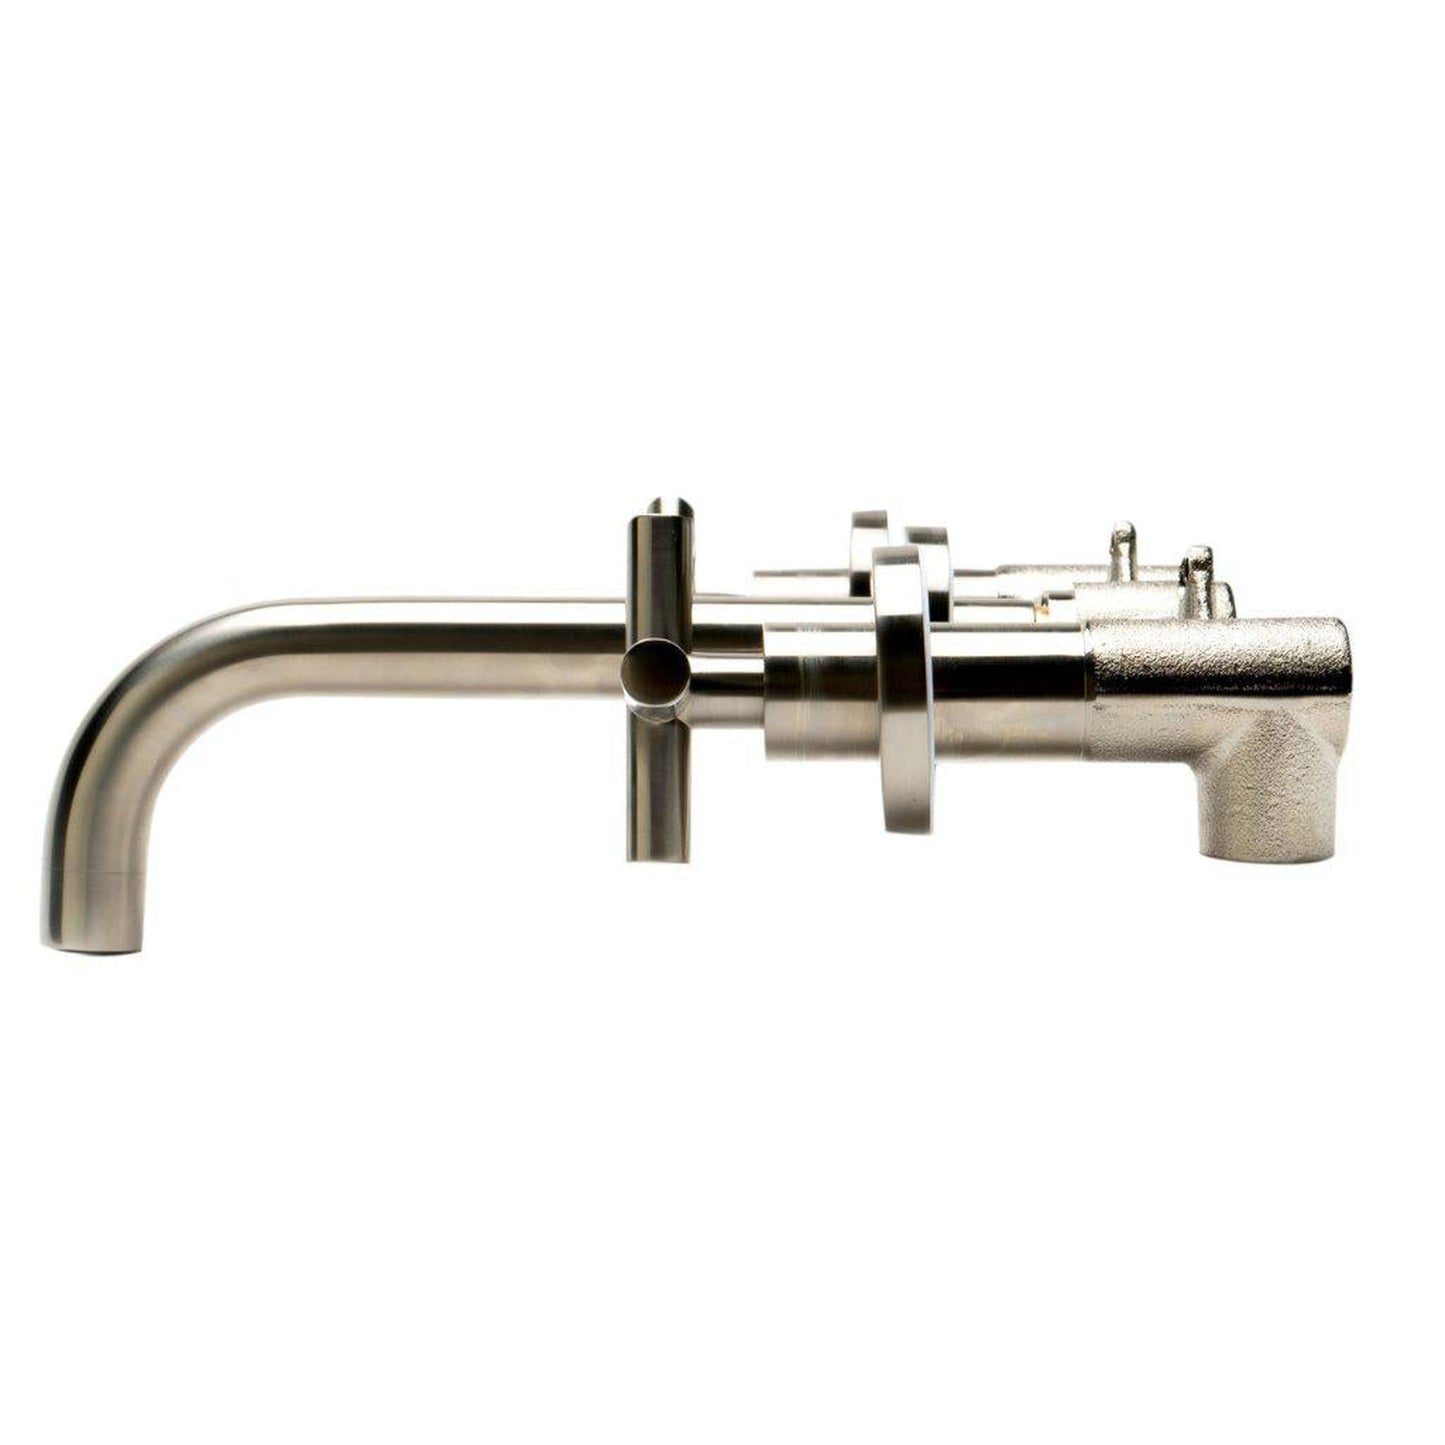 ALFI Brand AB1035-BN Brushed Nickel Wall-Mounted Widespread Round Spout Brass Bathroom Sink Faucet With Two Cross Handles